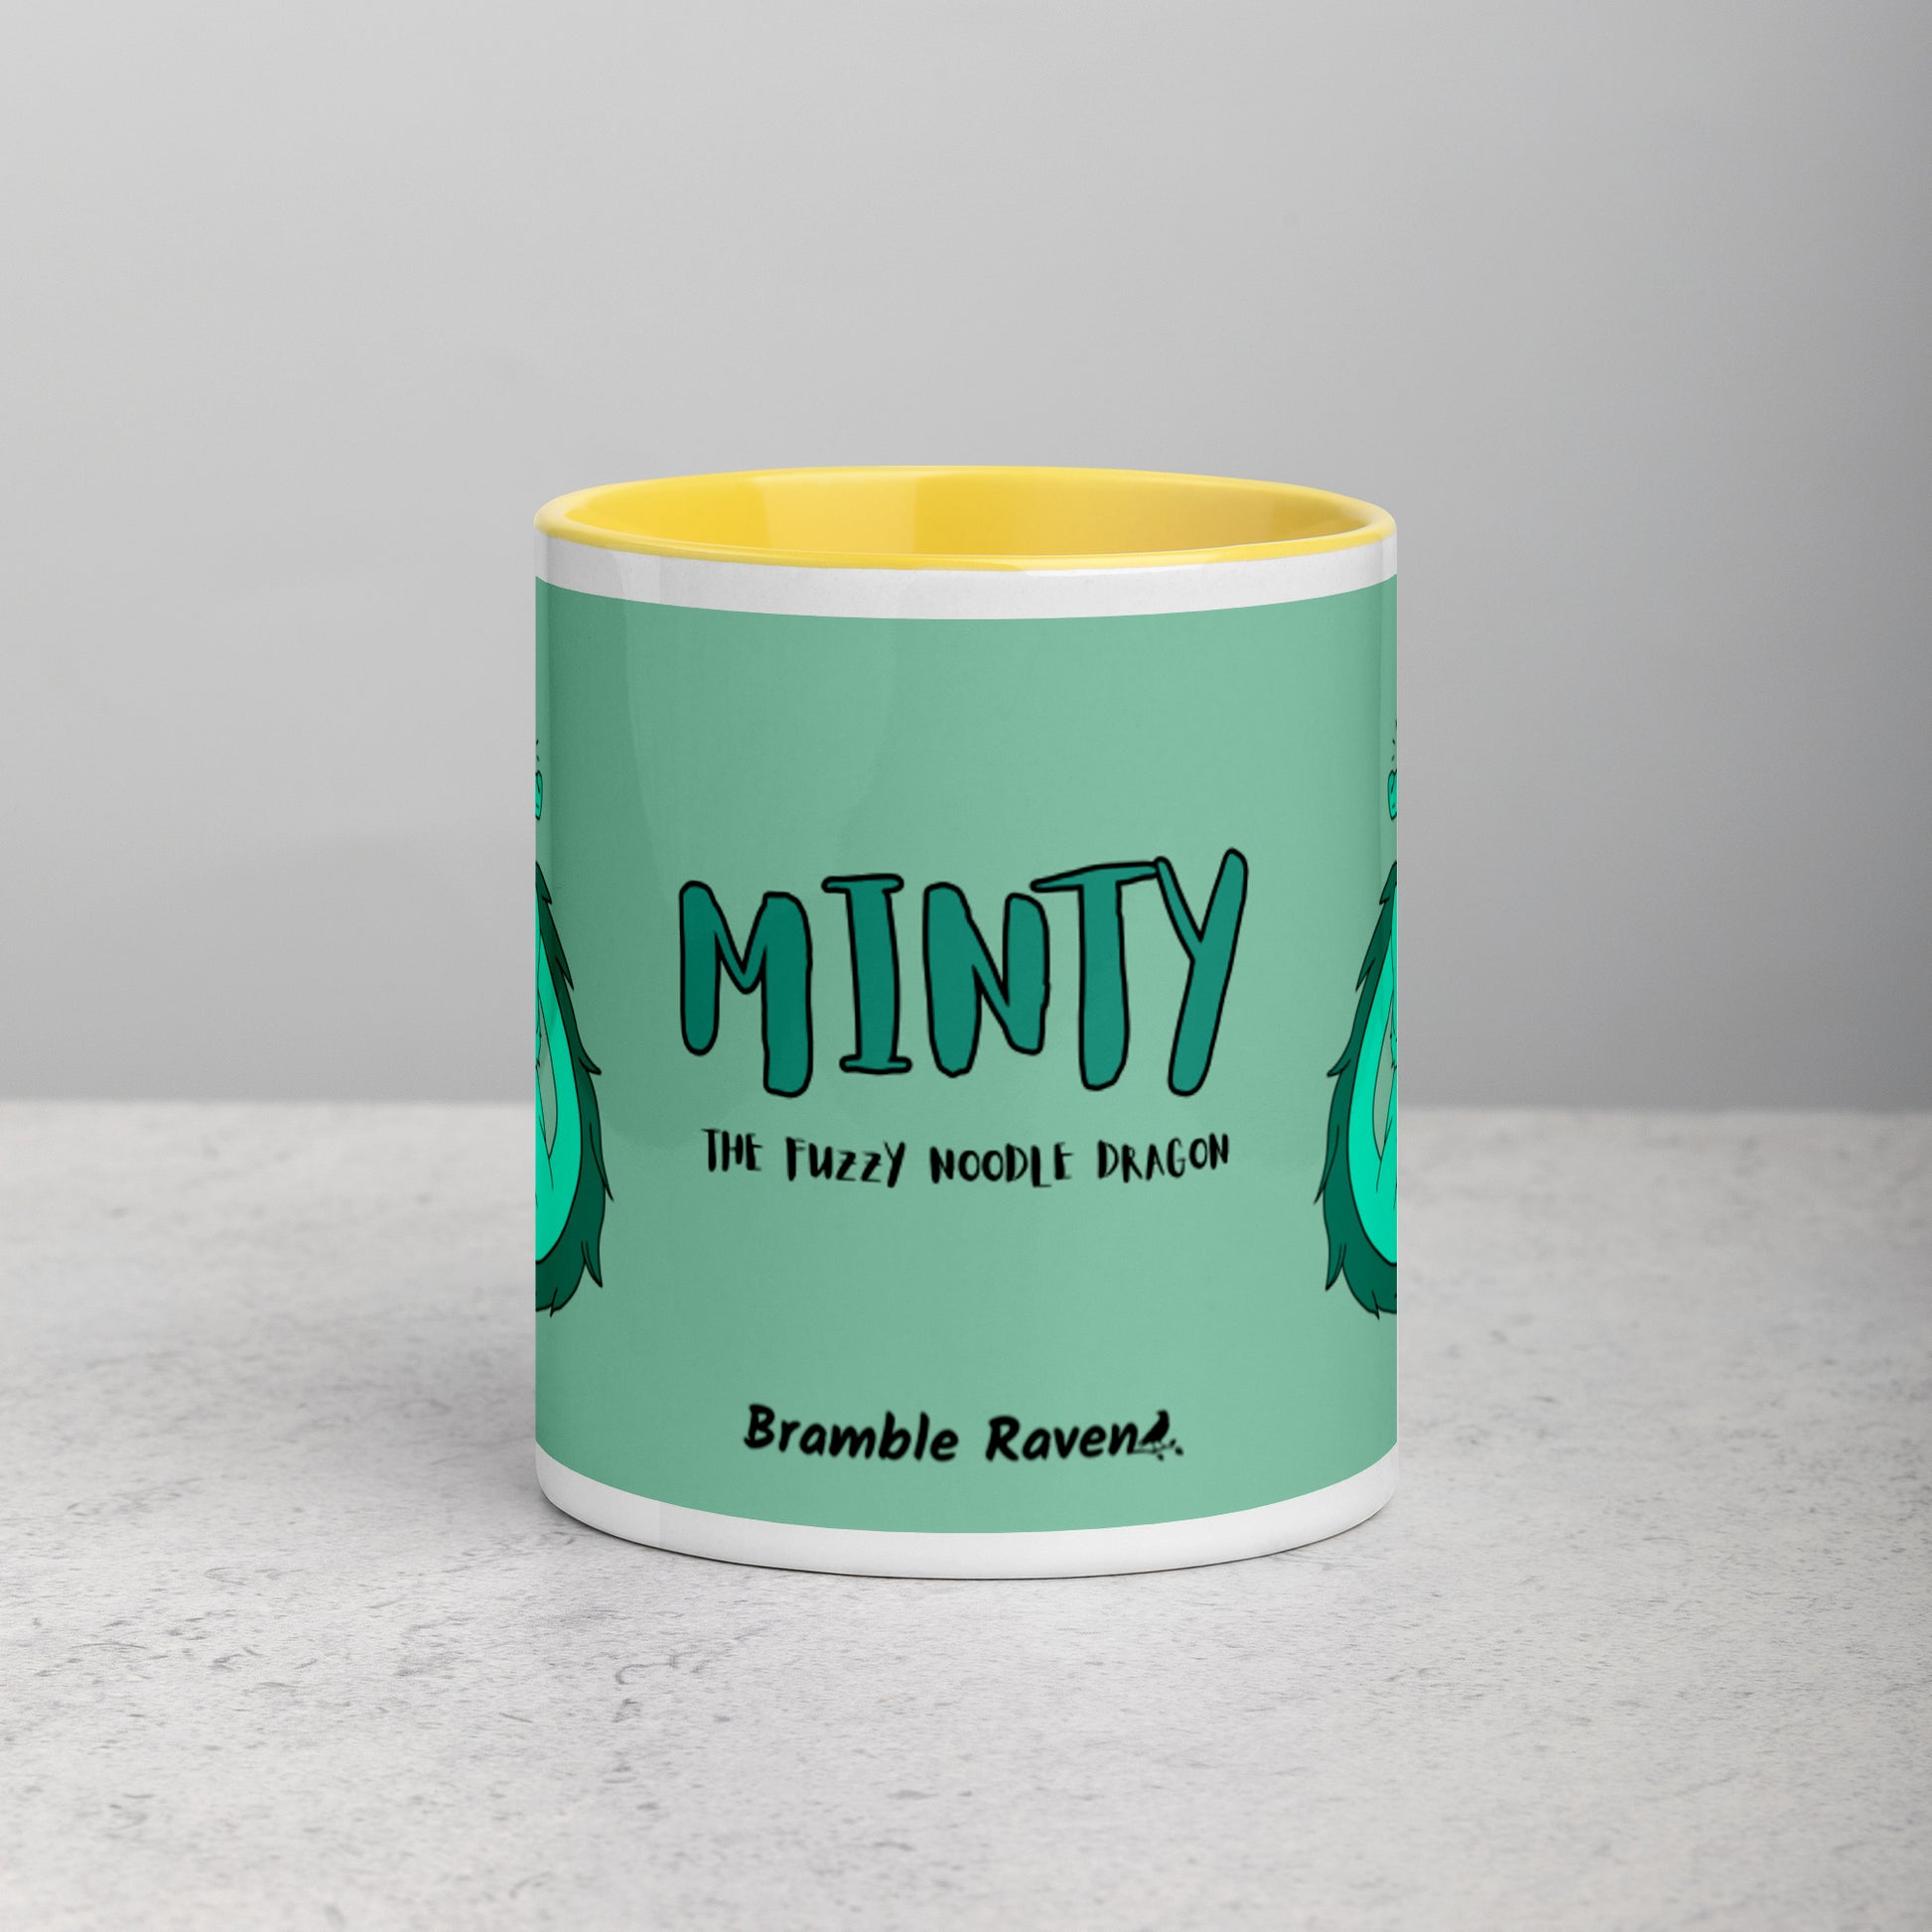 11 ounce white ceramic mug. Yellow inside and handle. Features double-sided image of Minty the Fuzzy Noodle Dragon on a green background. Shown on tabletop. Front view shows Minty the Fuzzy Noodle Dragon text and Bramble Raven logo.